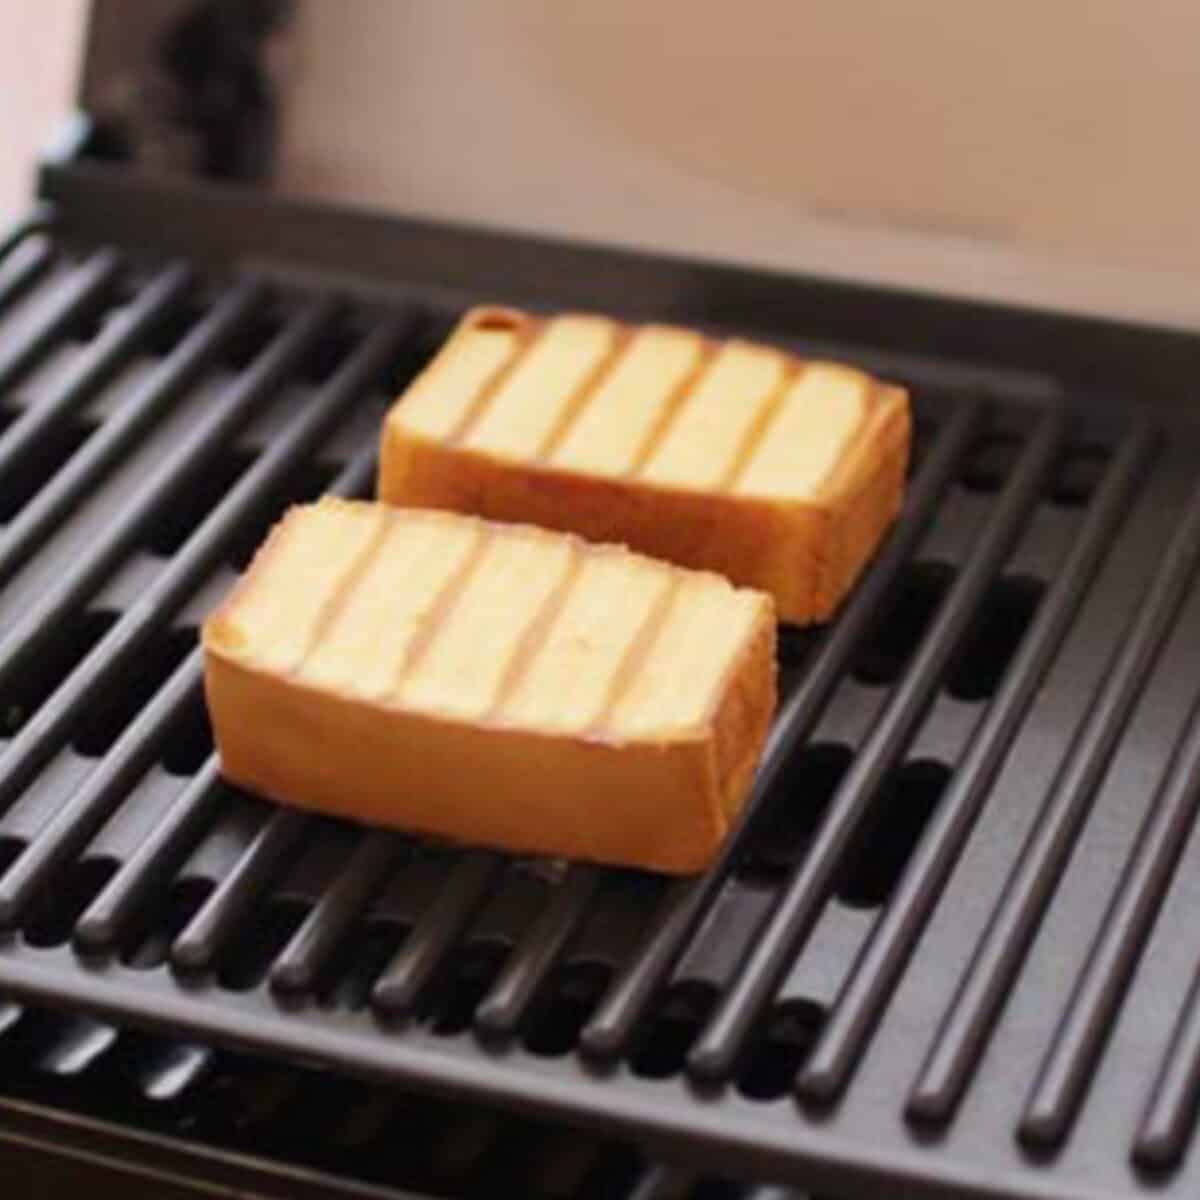 two slices of pound cake on a grill